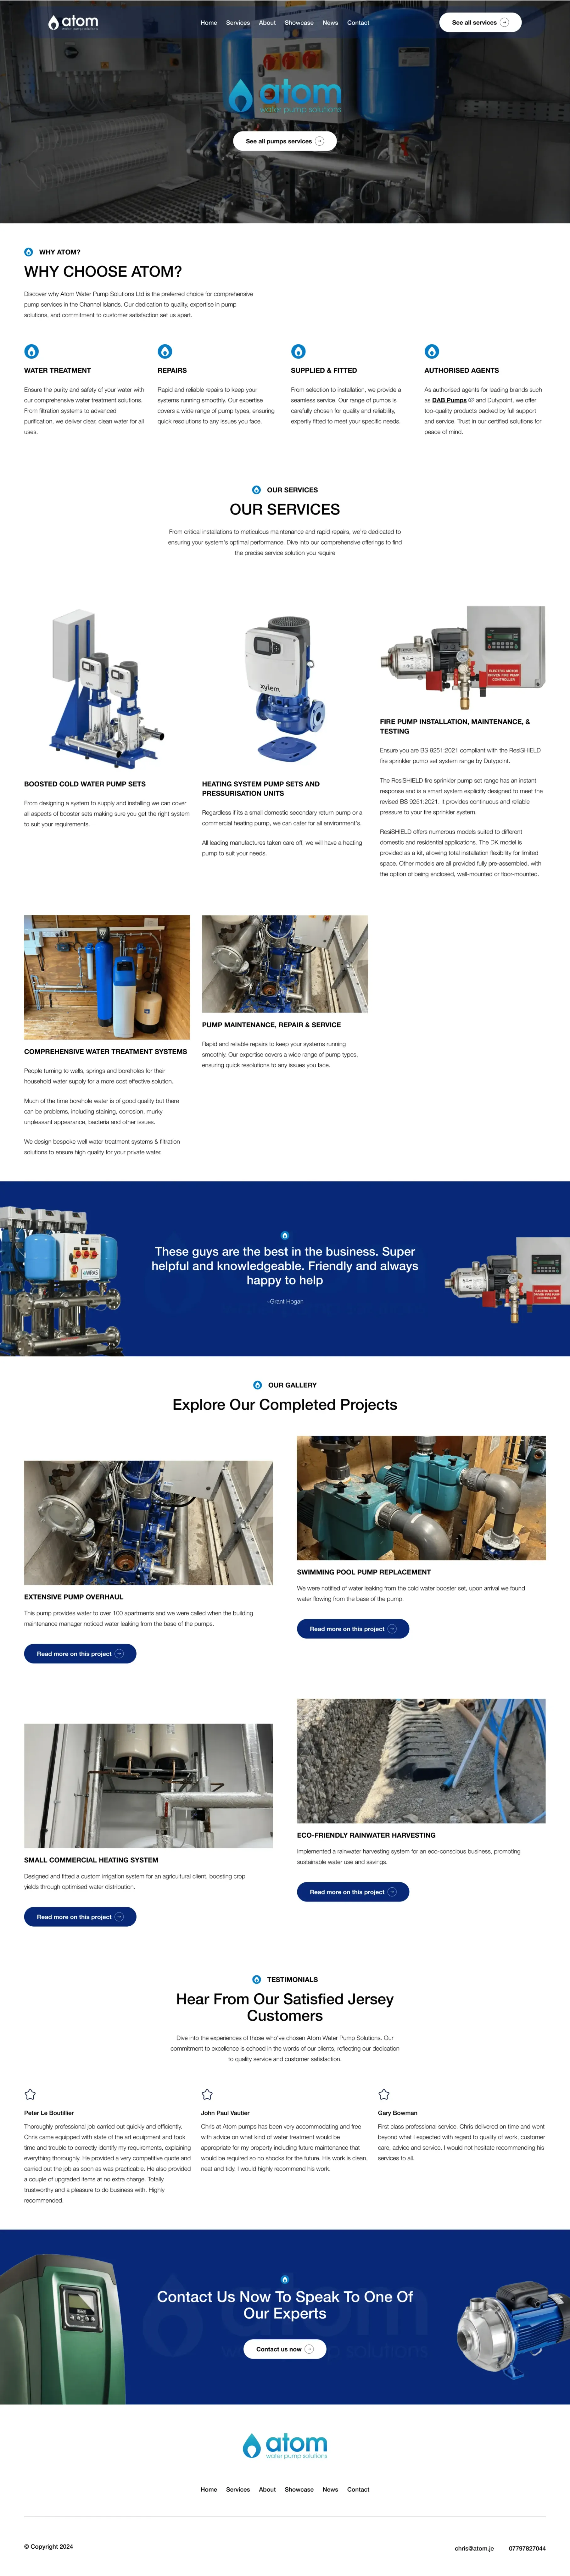 Atom Water Pump Solutions Home Page